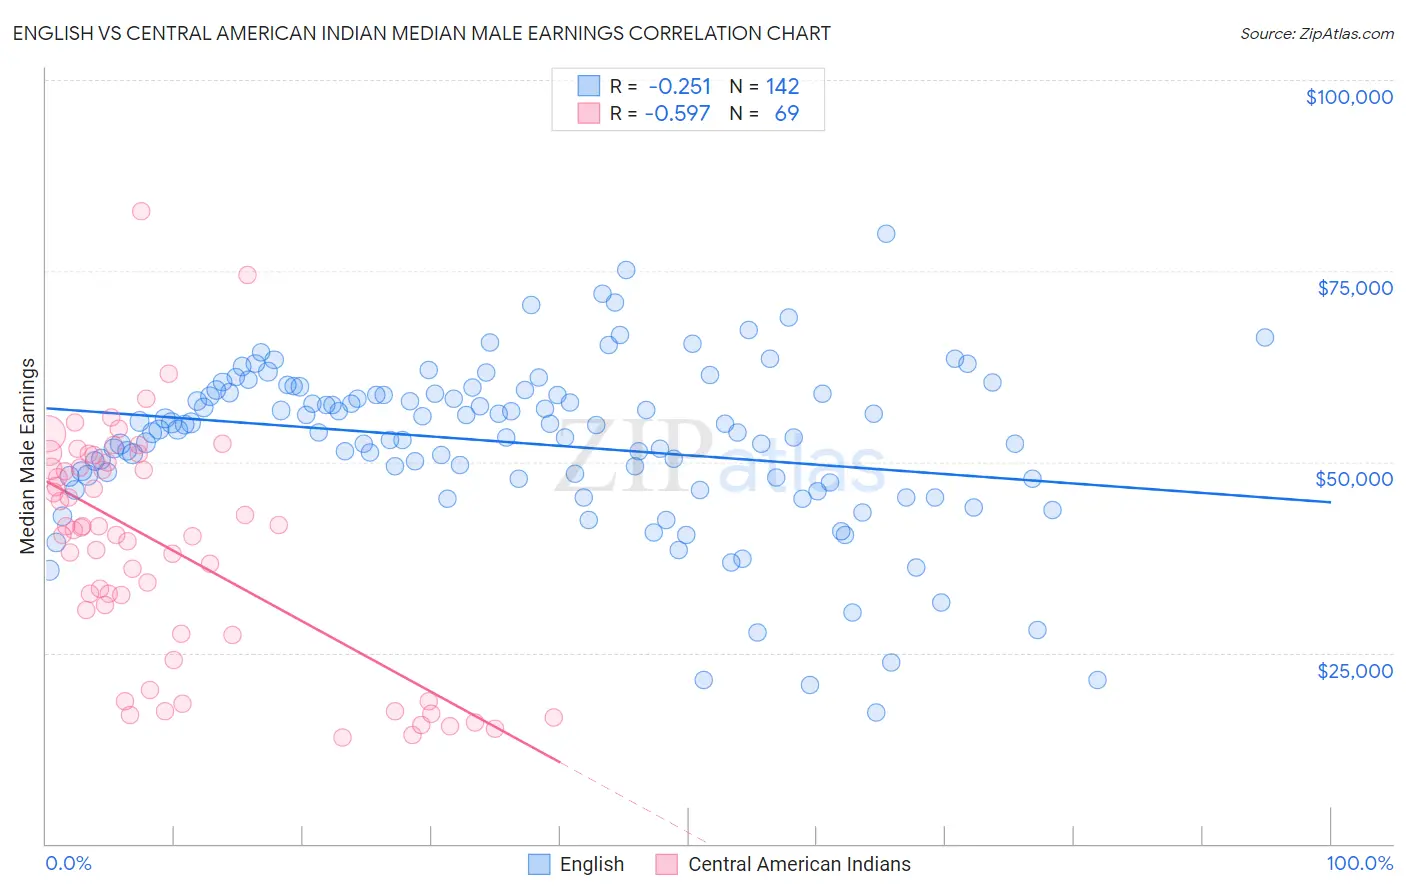 English vs Central American Indian Median Male Earnings